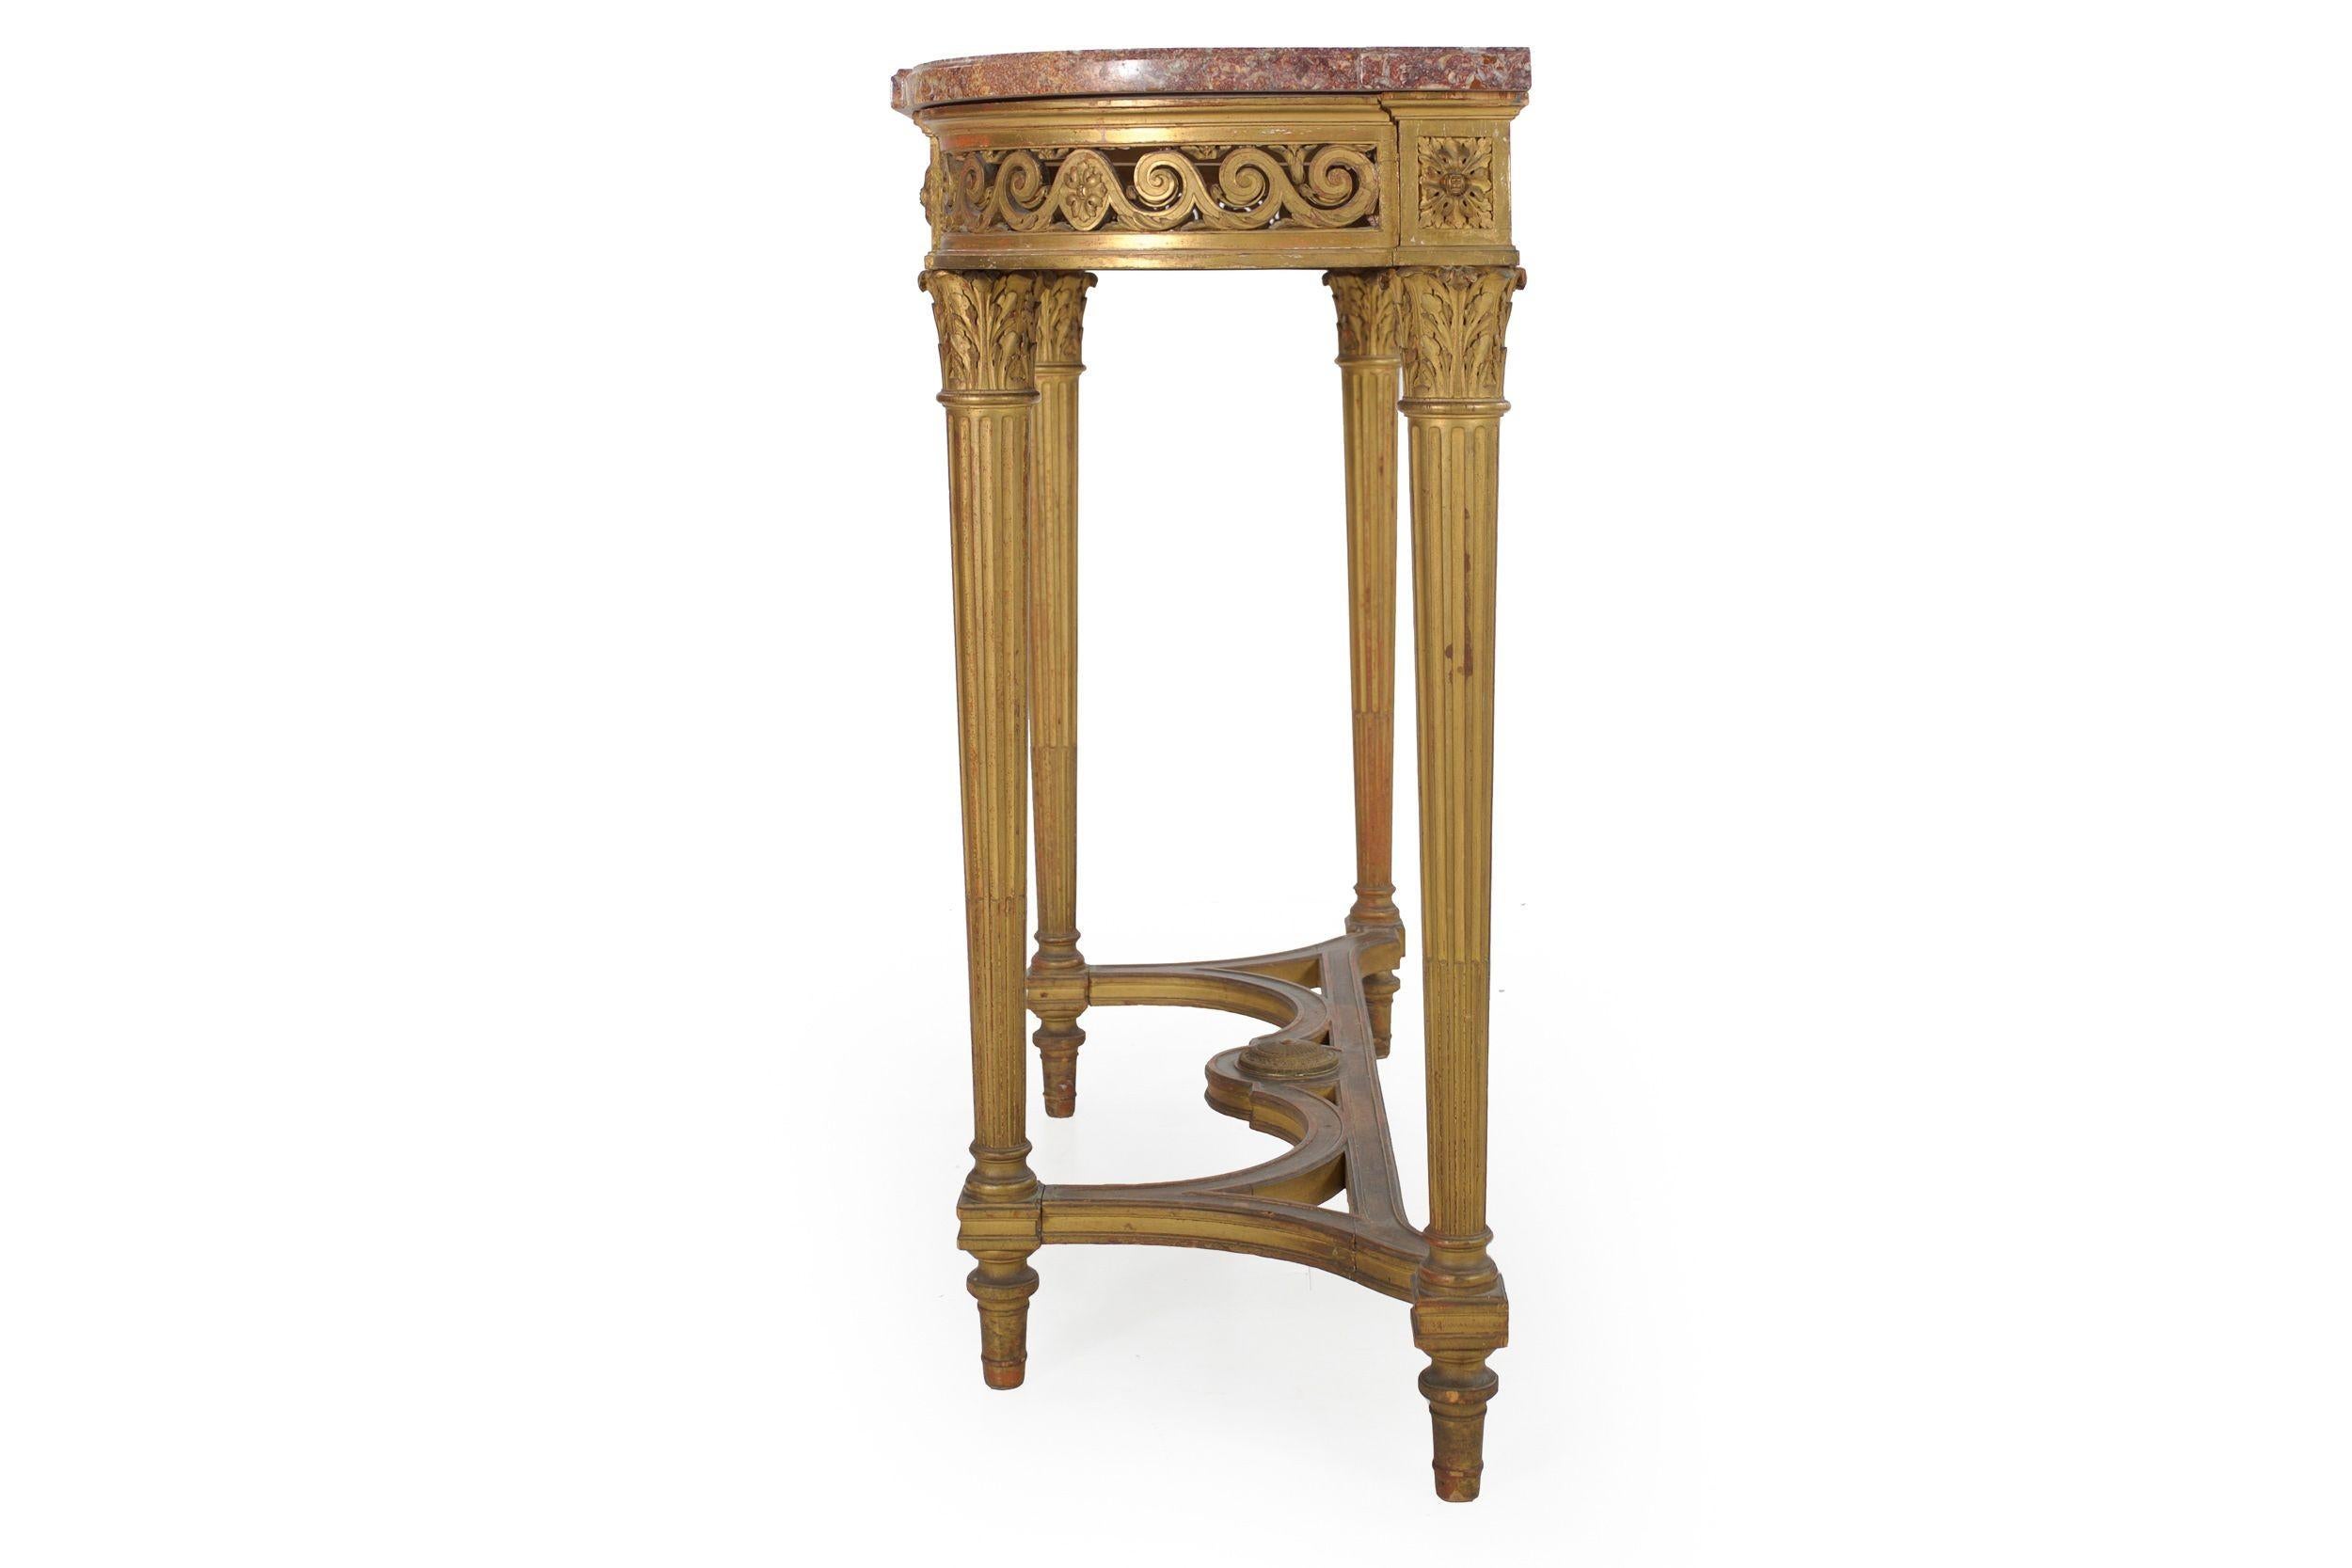 LOUIS XVI STYLE CARVED GILTWOOD PIER TABLE
Circa last quarter of the 19th century
Item # 203HQB04P 

A very good 19th century pier table with a conforming wonderful red and yellow marble top, it features a pierced apron with repeating cresting waves